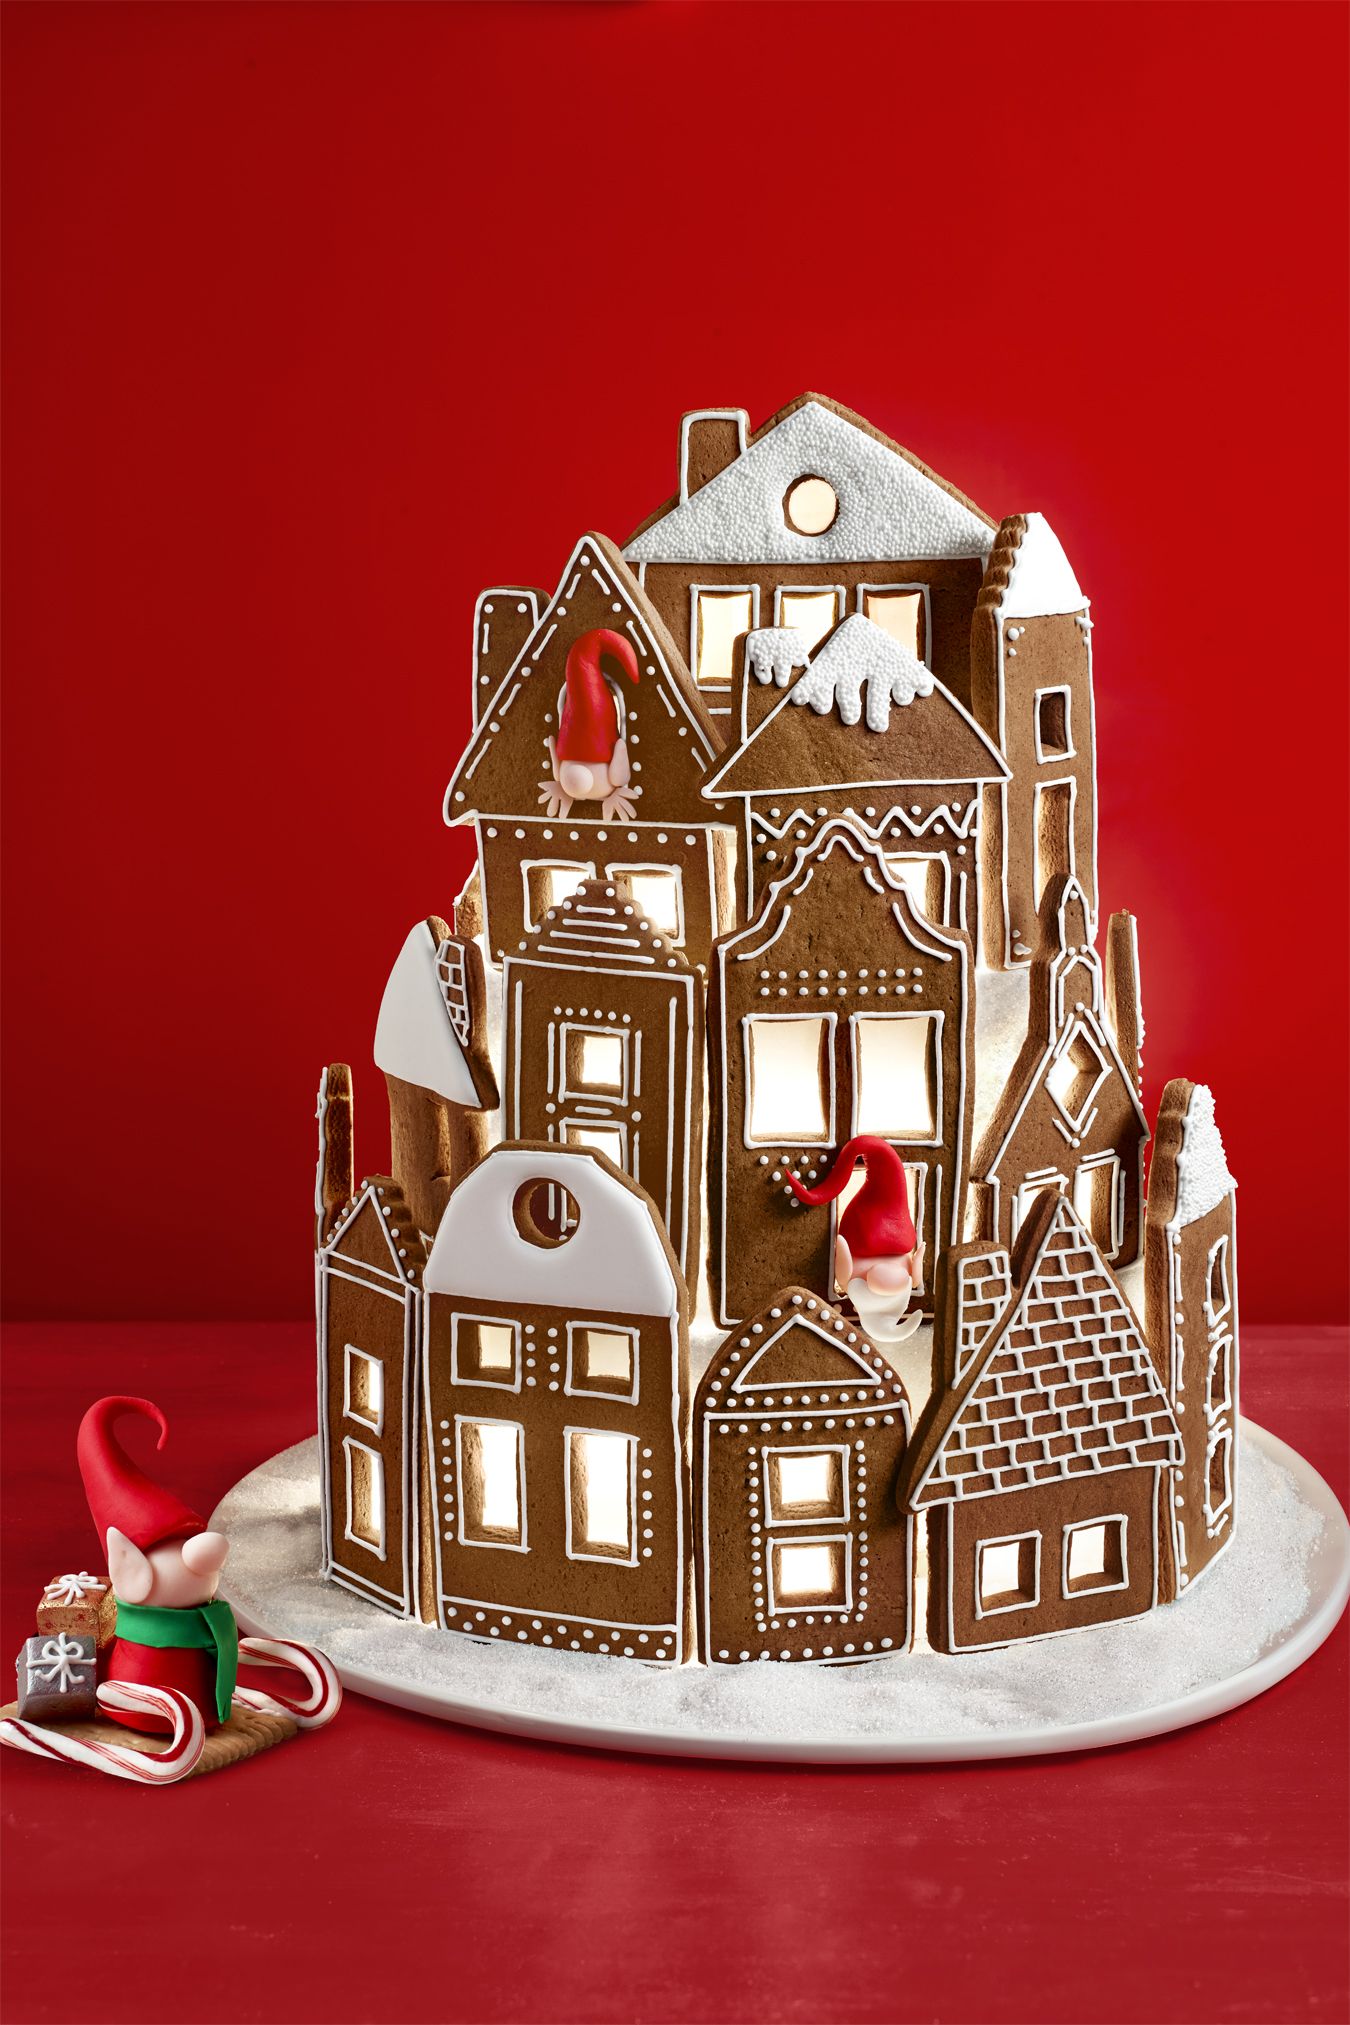 This DIY Gingerbread Village Is Made from Thrift Store Finds